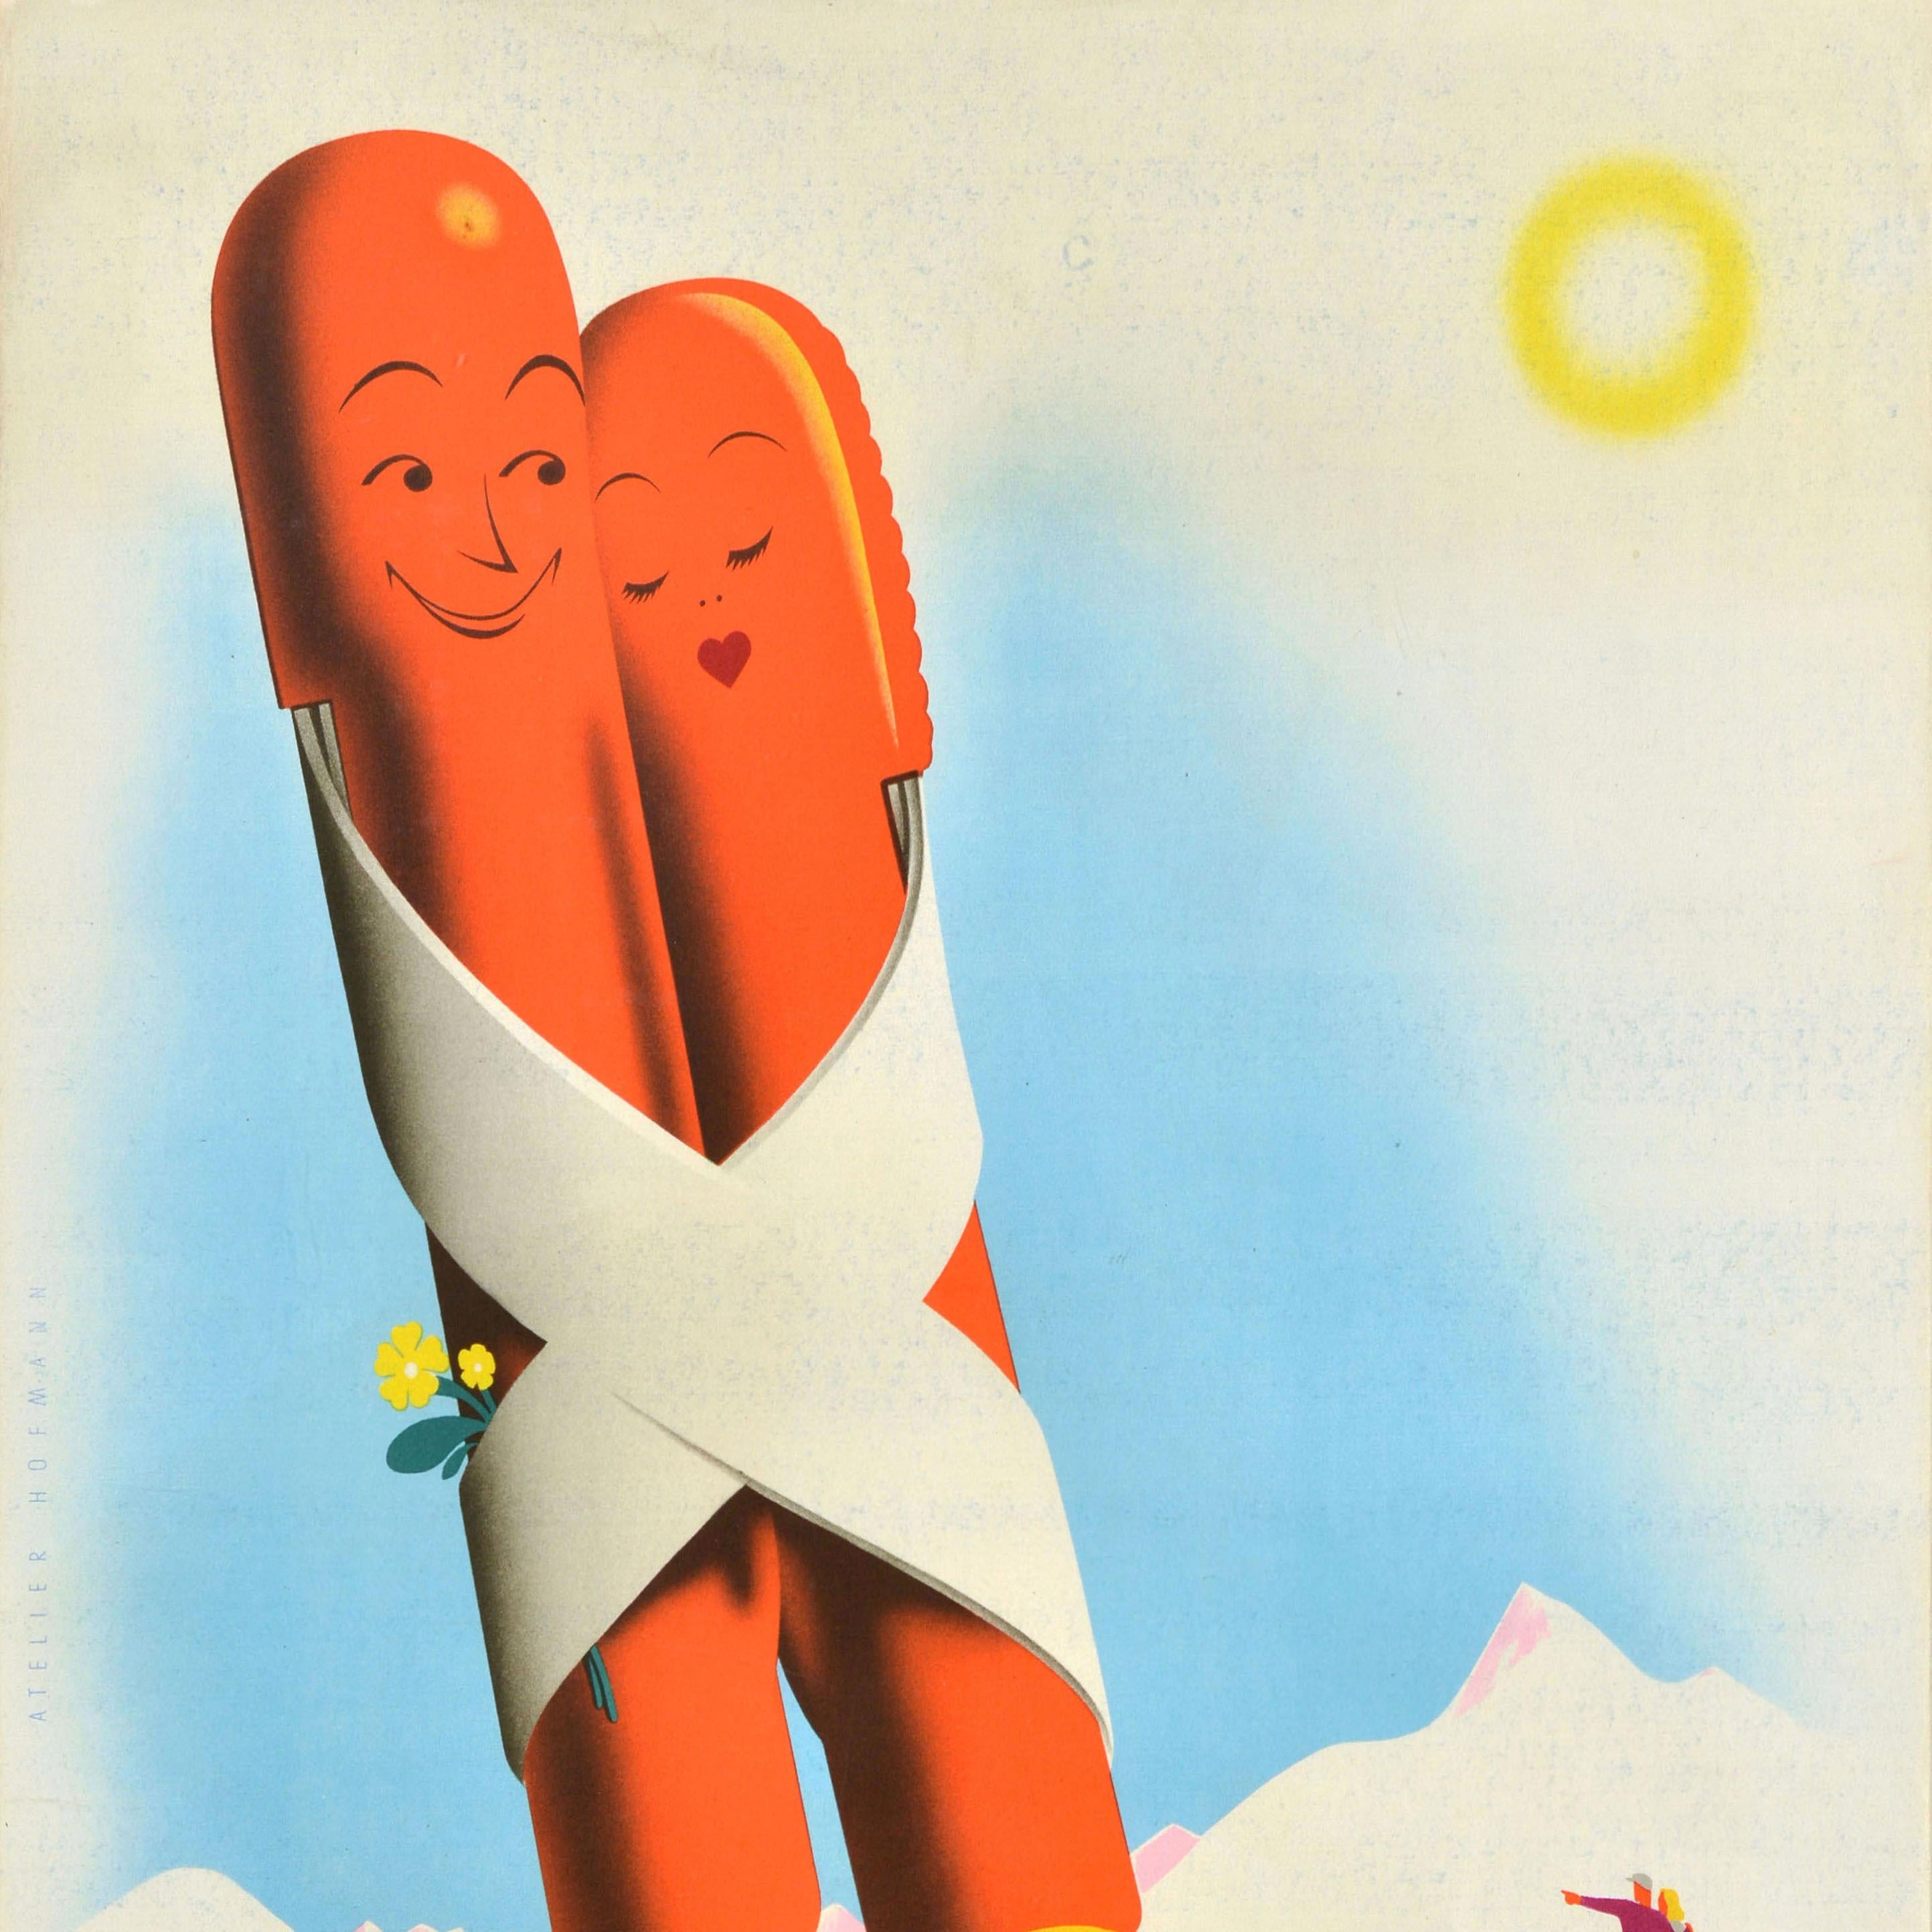 Original vintage winter sport and skiing travel poster for Austria. Great design depicting a fun and romantic image of a pair of ski poles leaning into each other with the faces of a smiling man and lady on the handles at the top, the lady featuring